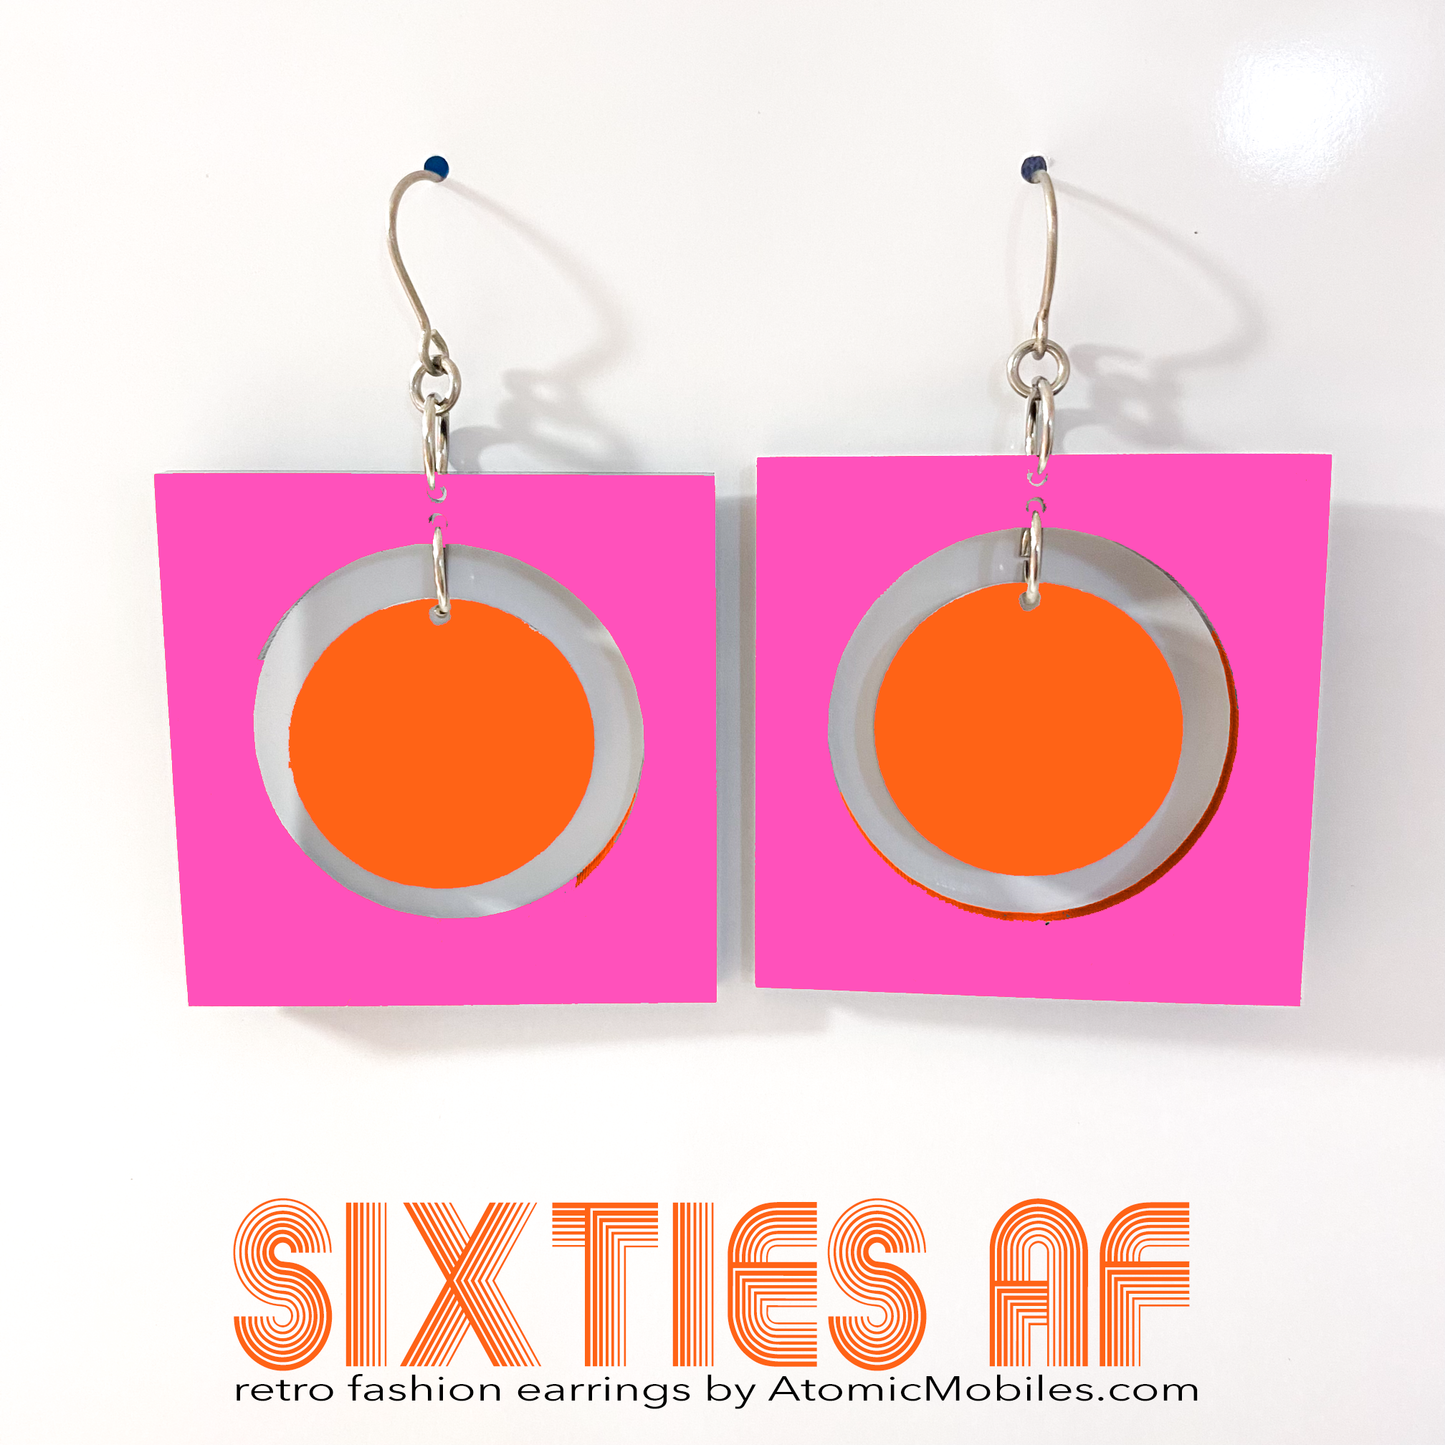 SIXTIES AF groovy retro fashion earrings inspired by the 1960s in hot pink and orange - by AtomicMobiles.com